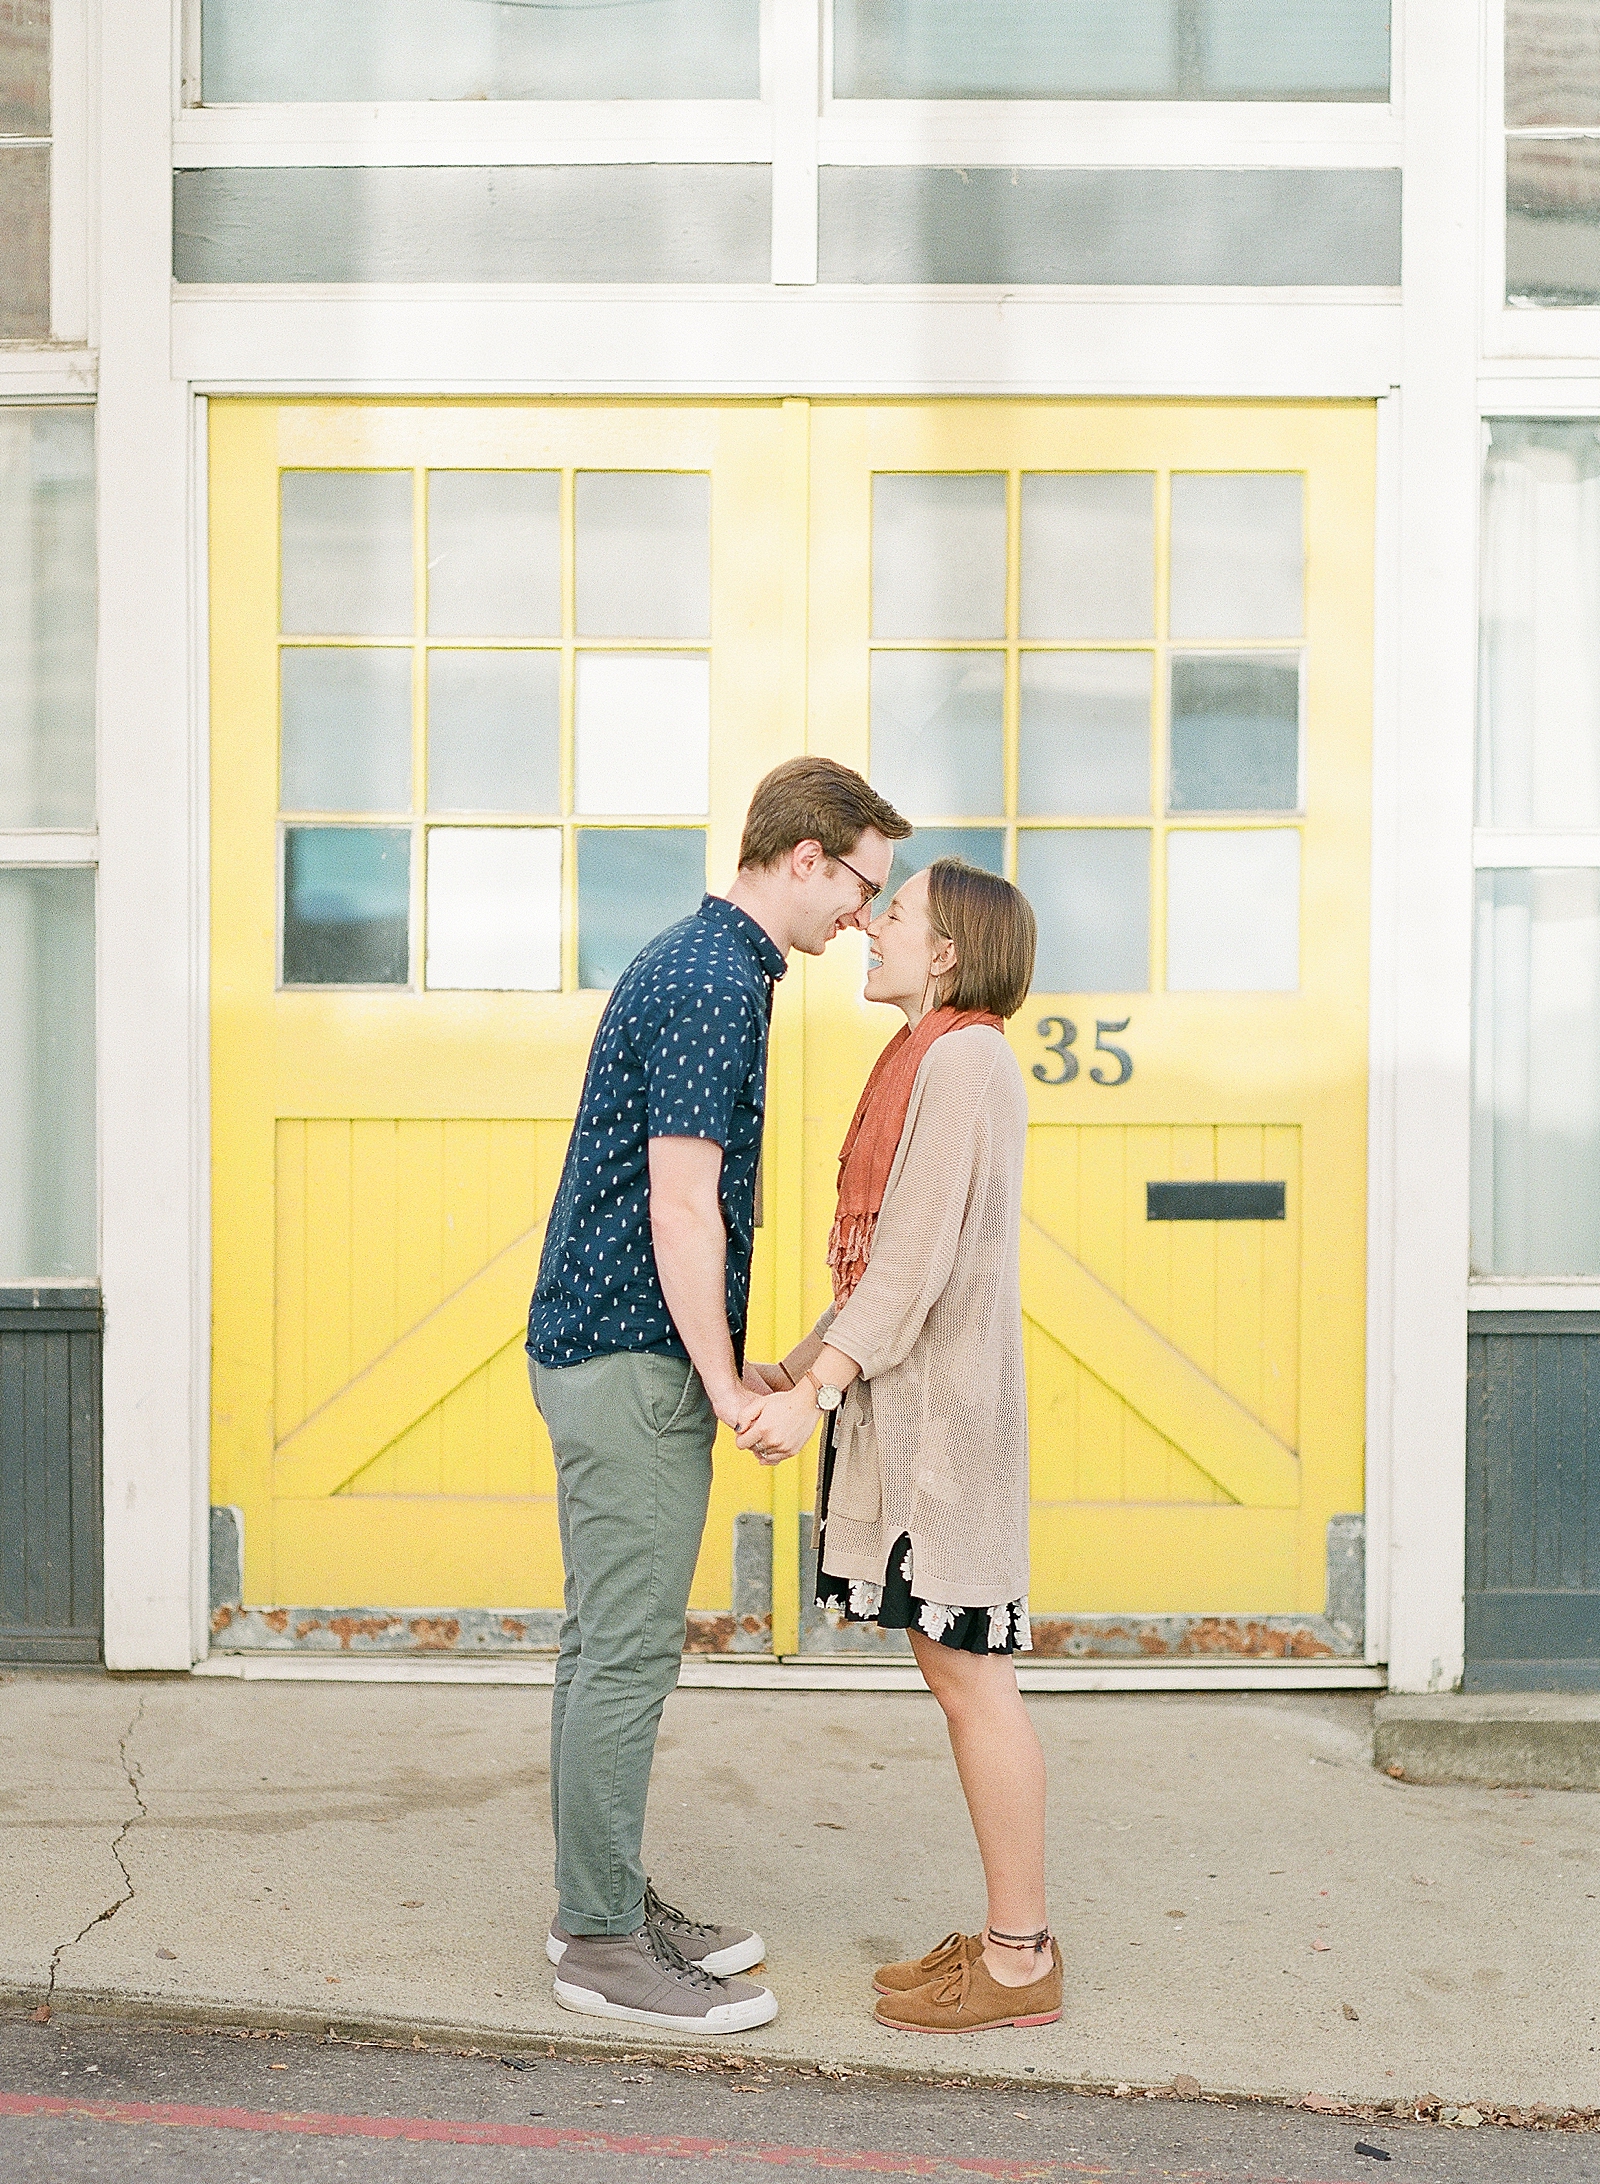 Downtown Asheville Engagement Session Couple Nose to Nose in front of yellow door Photo